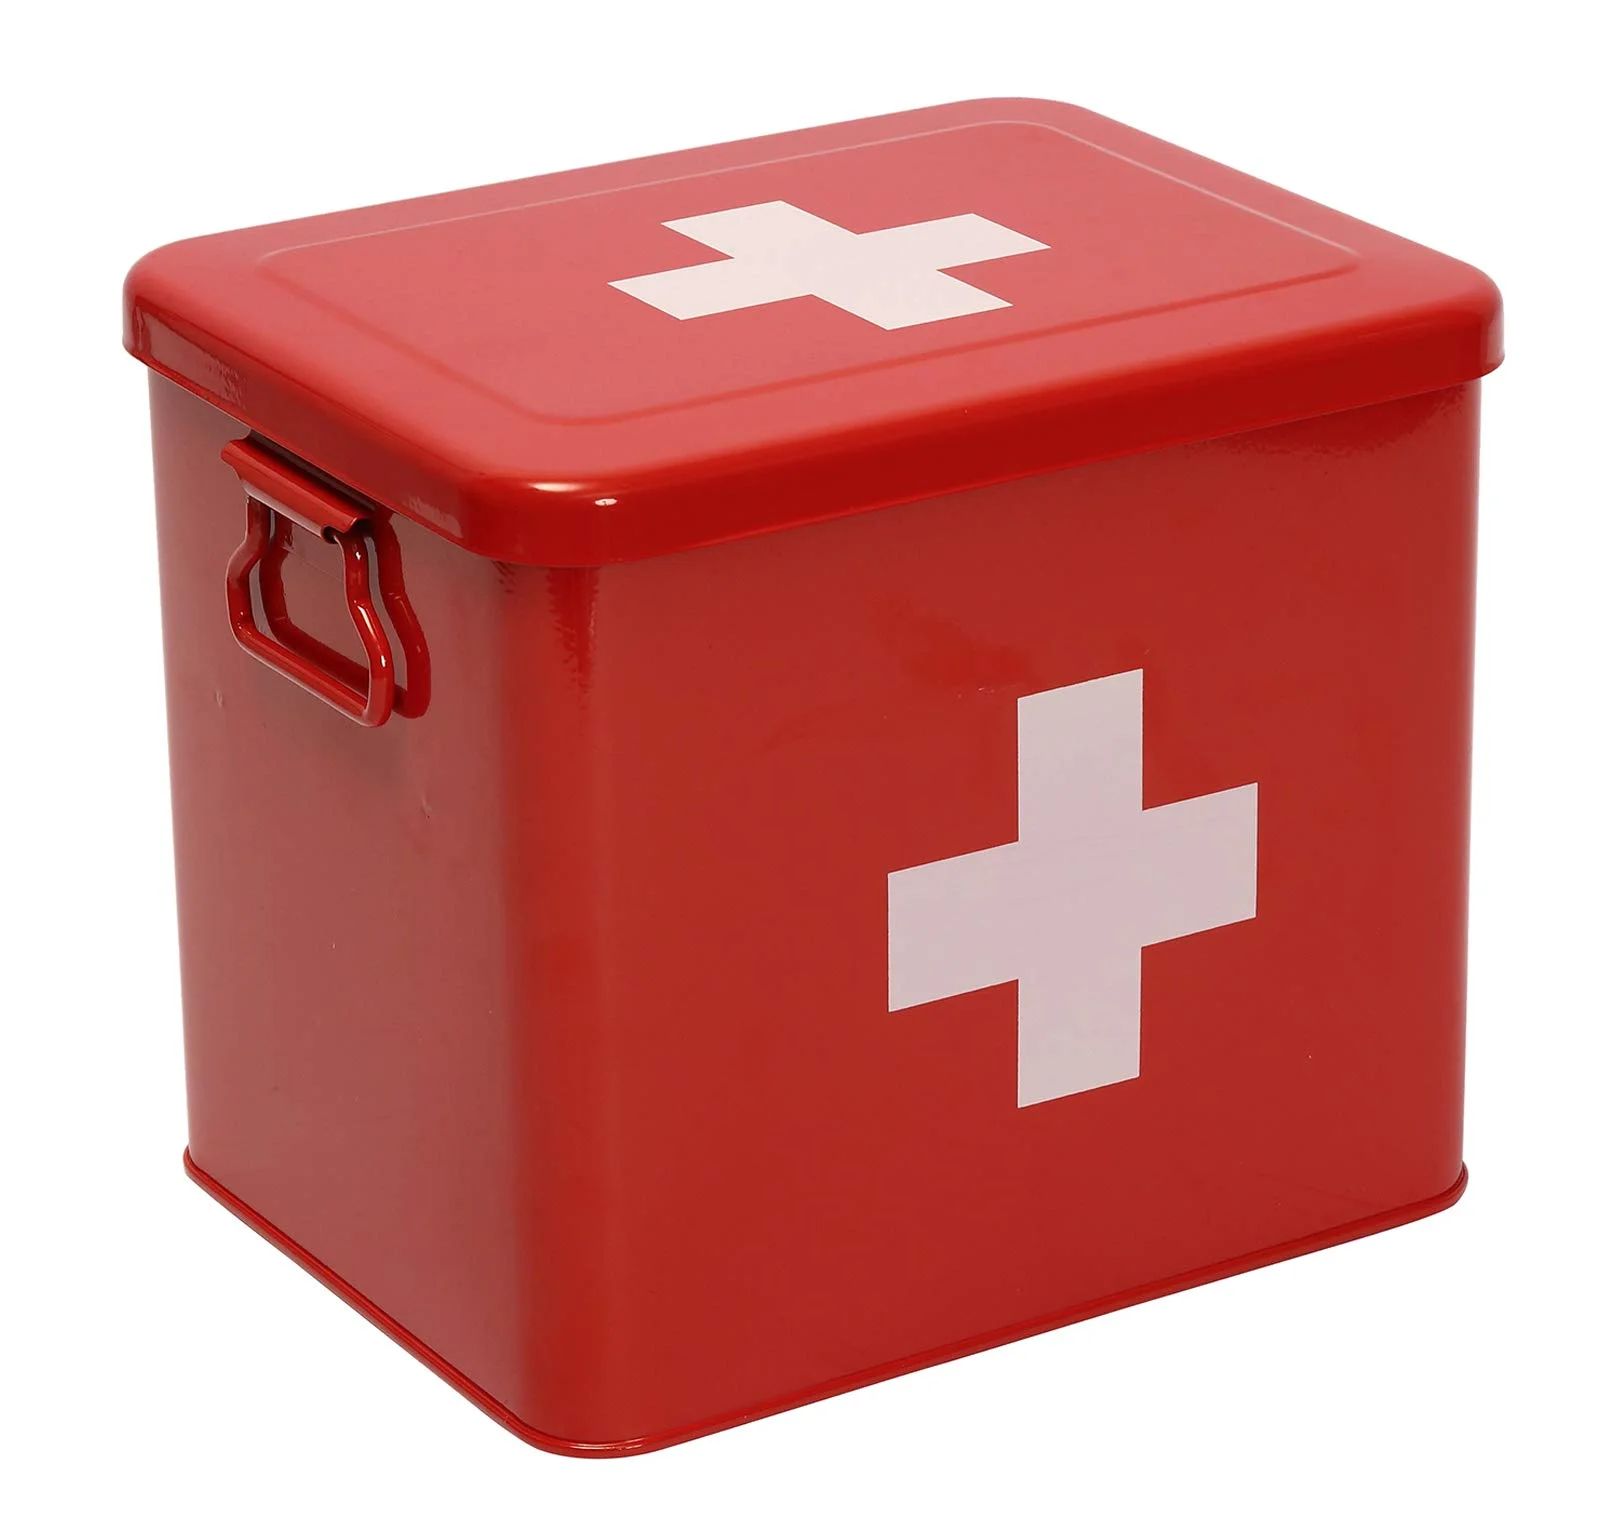 2-Tier Metal First Aid Kit Storage Bin - Organize and Safeguard Your Medicine Supplies with this ... | Walmart (US)